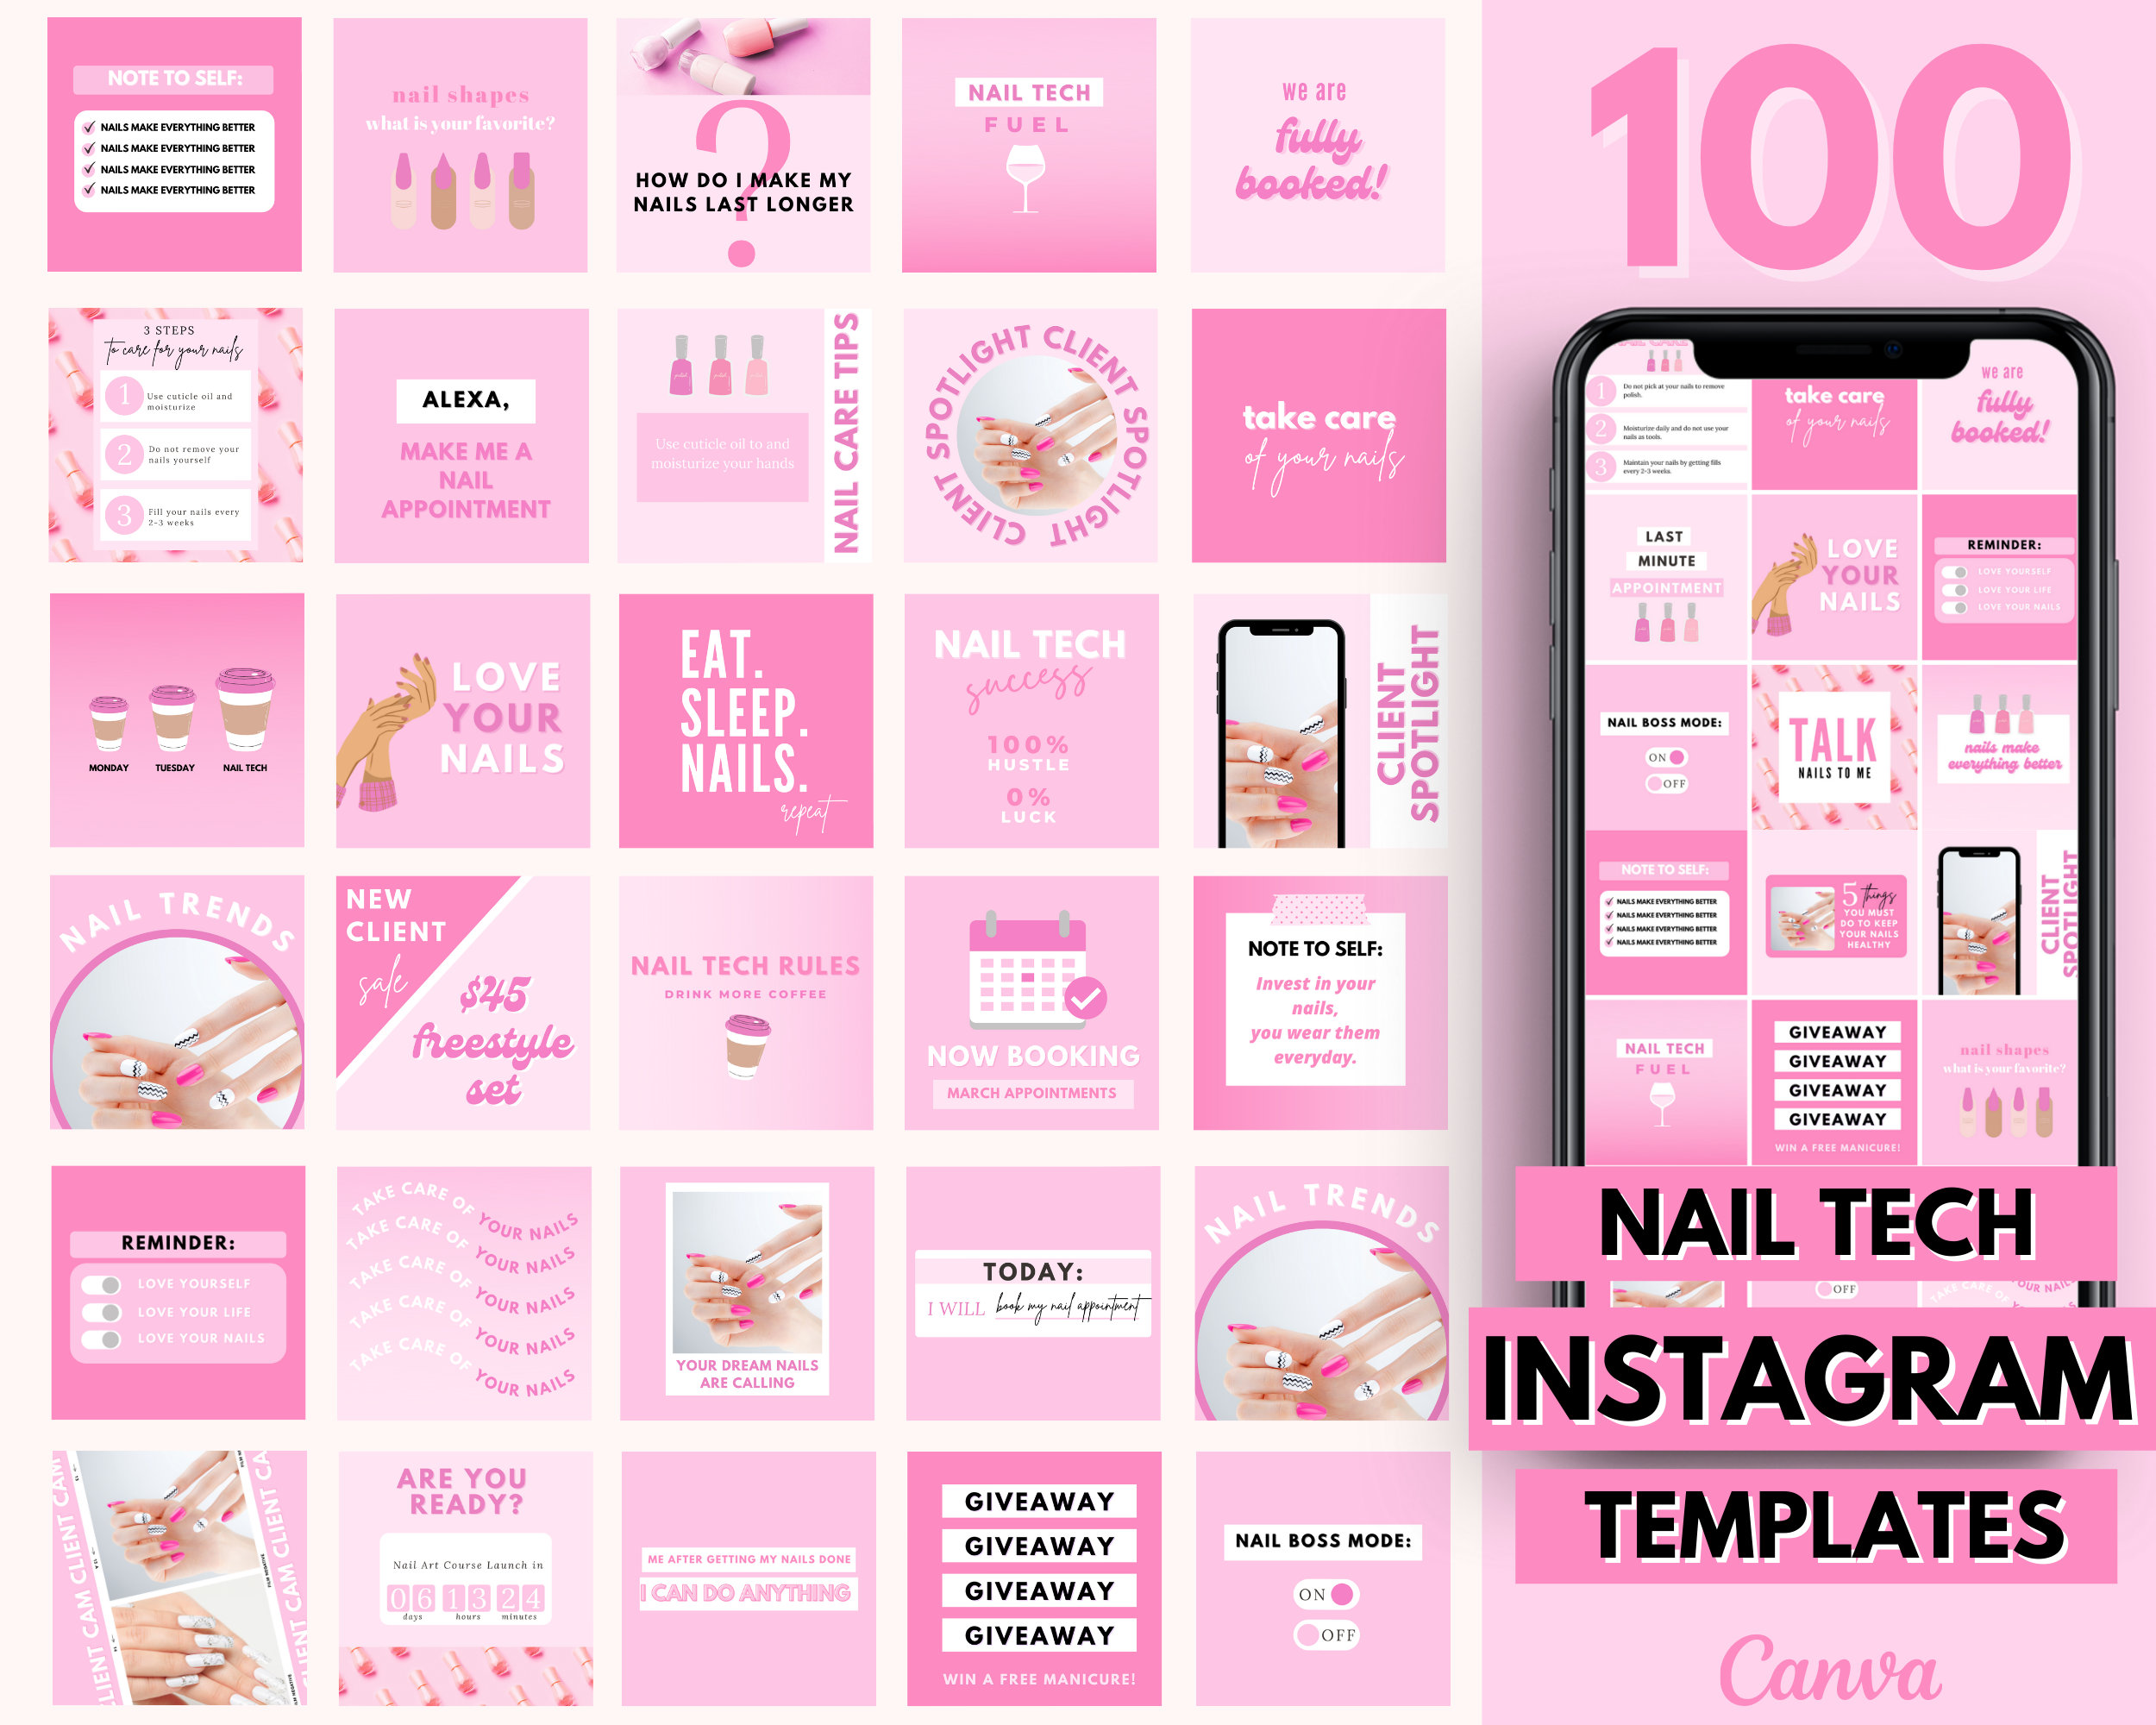 6. How to Film and Edit Nail Art Videos for Social Media - wide 7